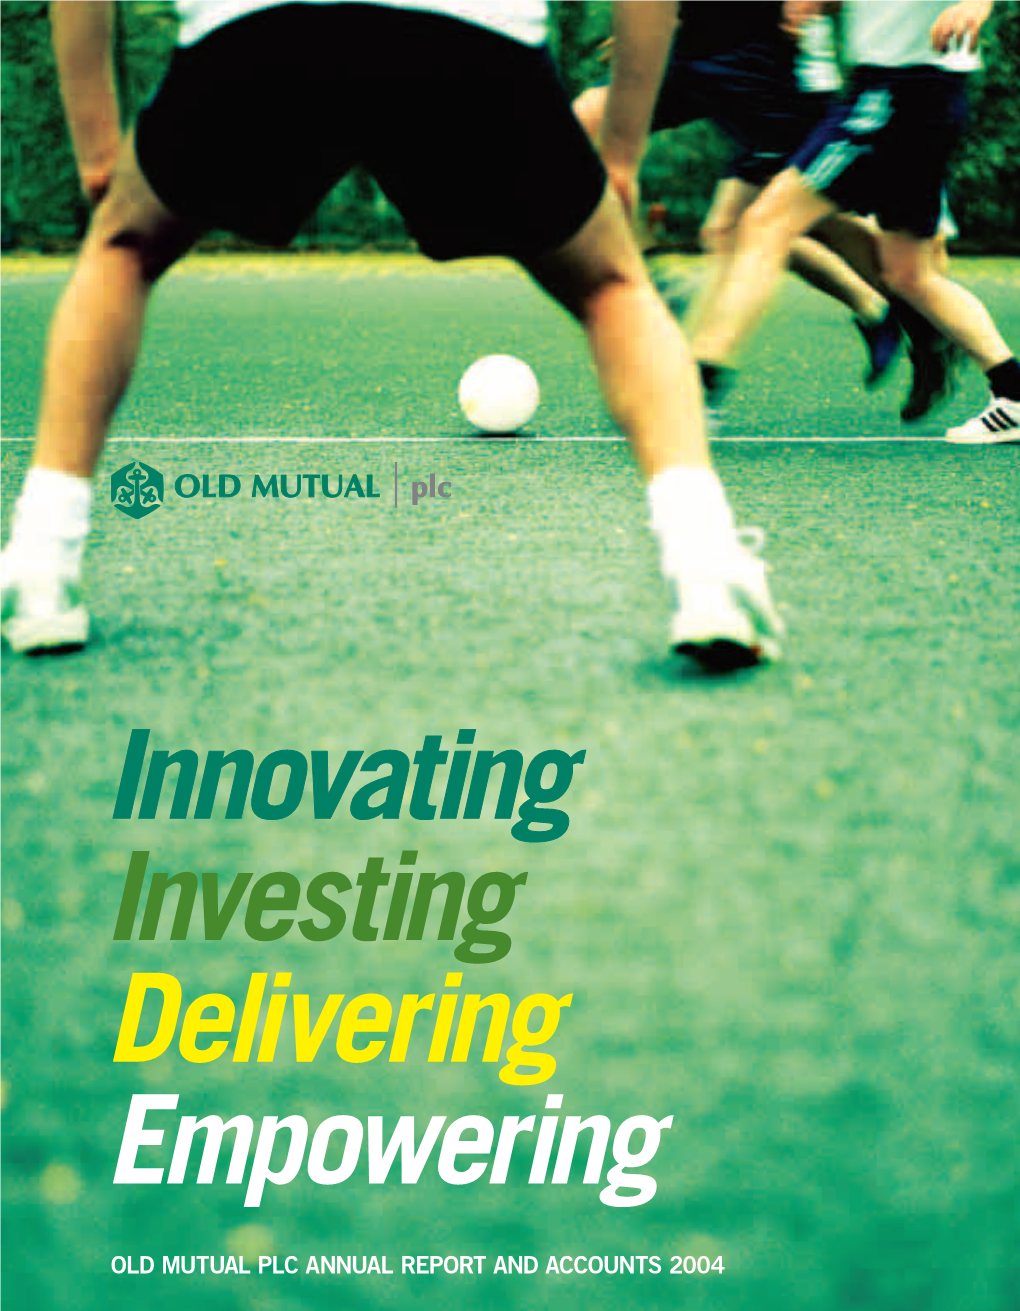 OLD MUTUAL PLC ANNUAL REPORT and ACCOUNTS 2004 We Are an International Financial Services Group, Whose Activities Are Focused on Asset Gathering and Asset Management